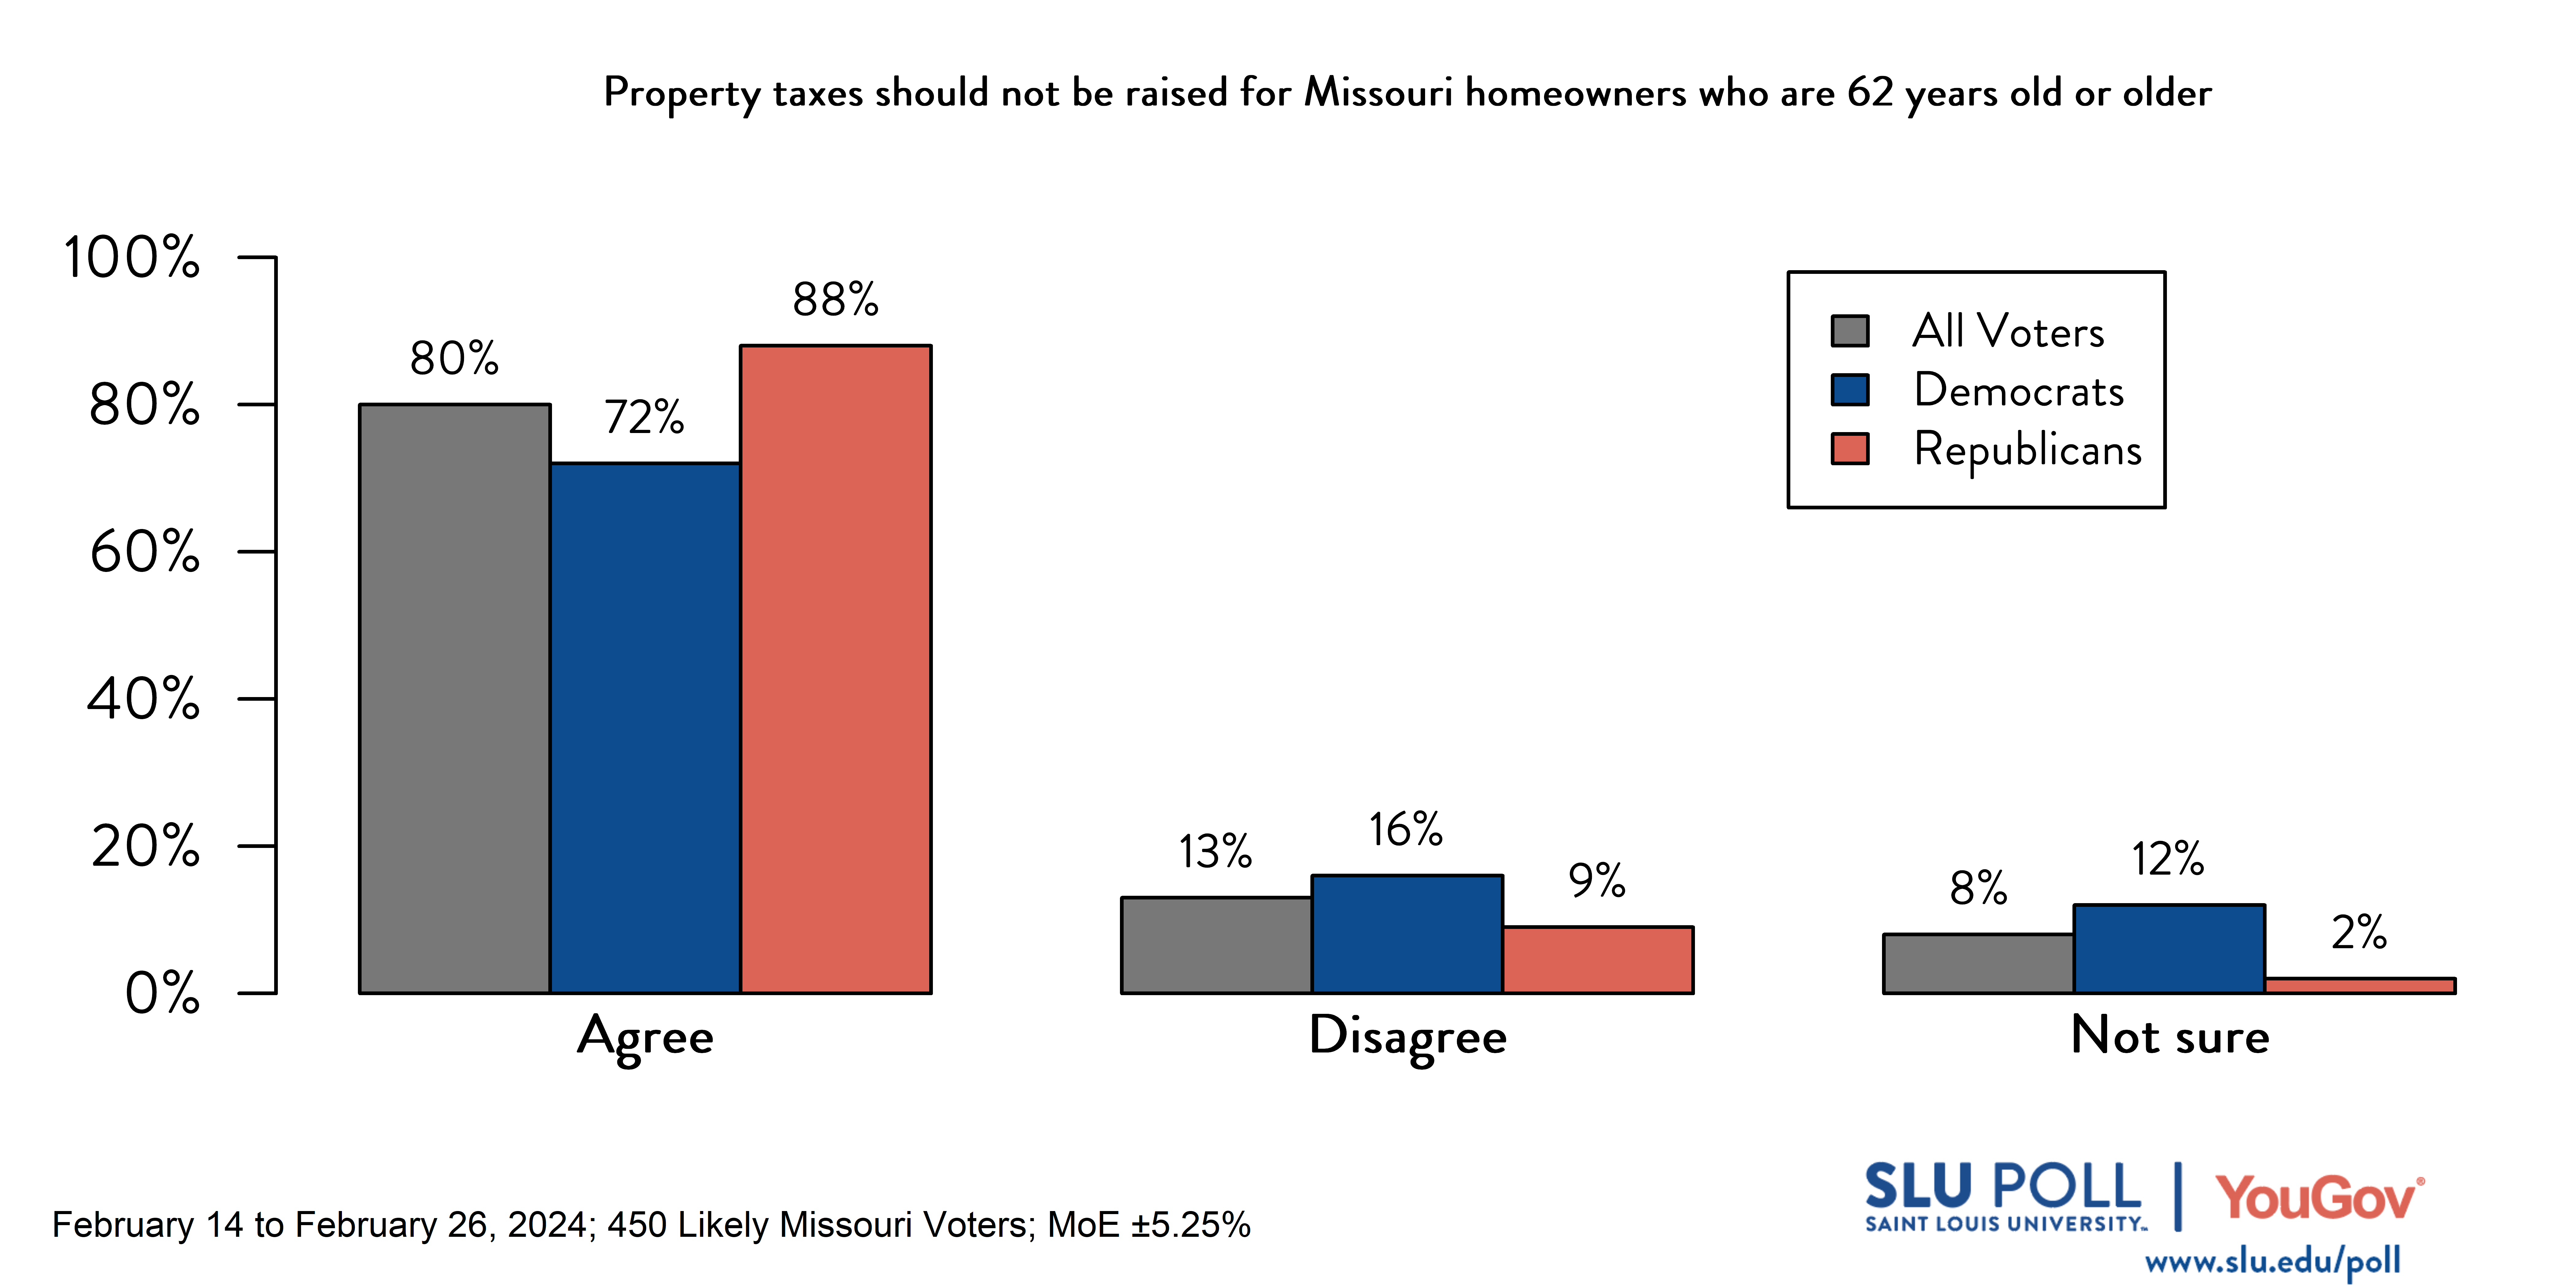 Bar graph of SLU/YouGov Poll results for property tax question. Results in caption